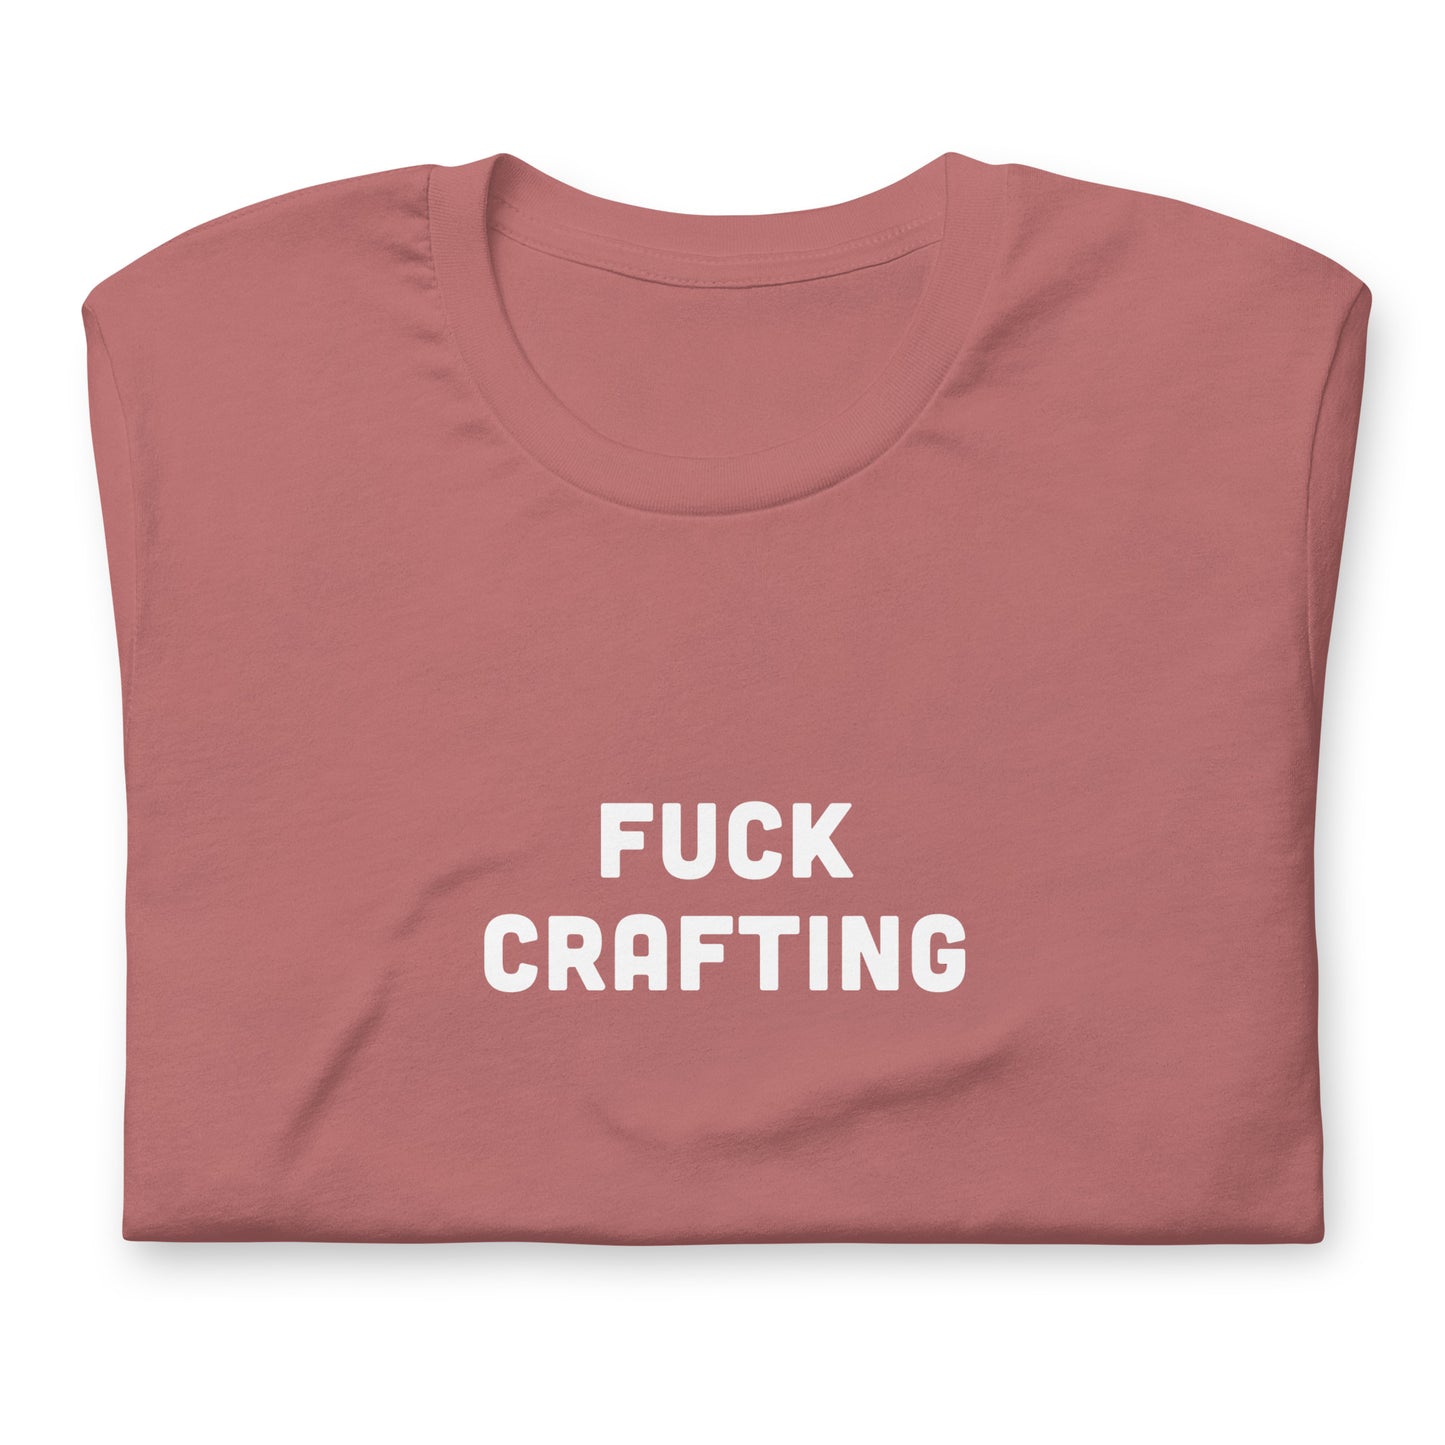 Fuck Crafting T-Shirt Size 2XL Color Navy